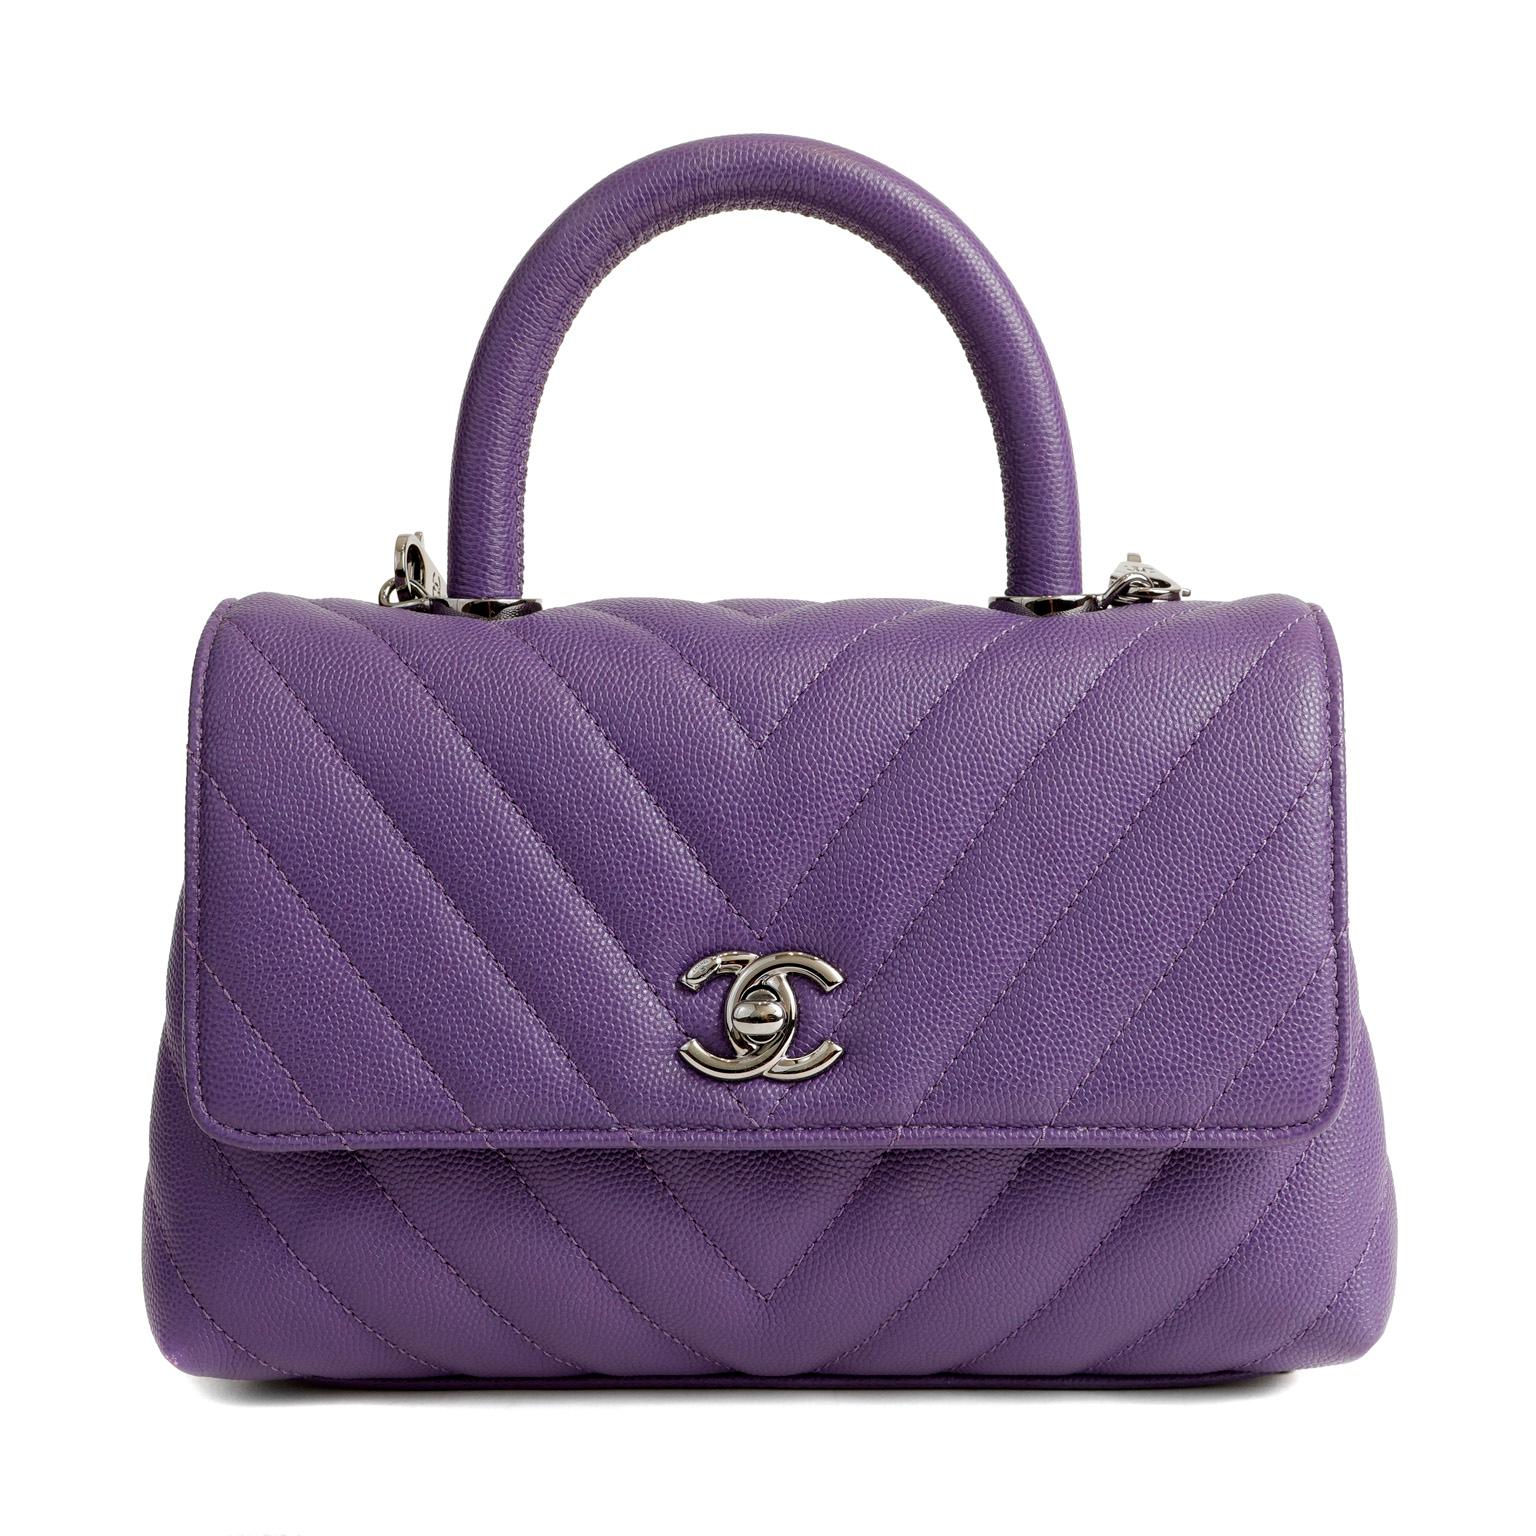 This authentic Chanel Purple Caviar Chevron Mini Coco Handle Bag is in pristine condition.  The Coco Handle is a distinctively different flap bag silhouette; a must have addition to any collection.
Exquisite purple caviar leather is textured and